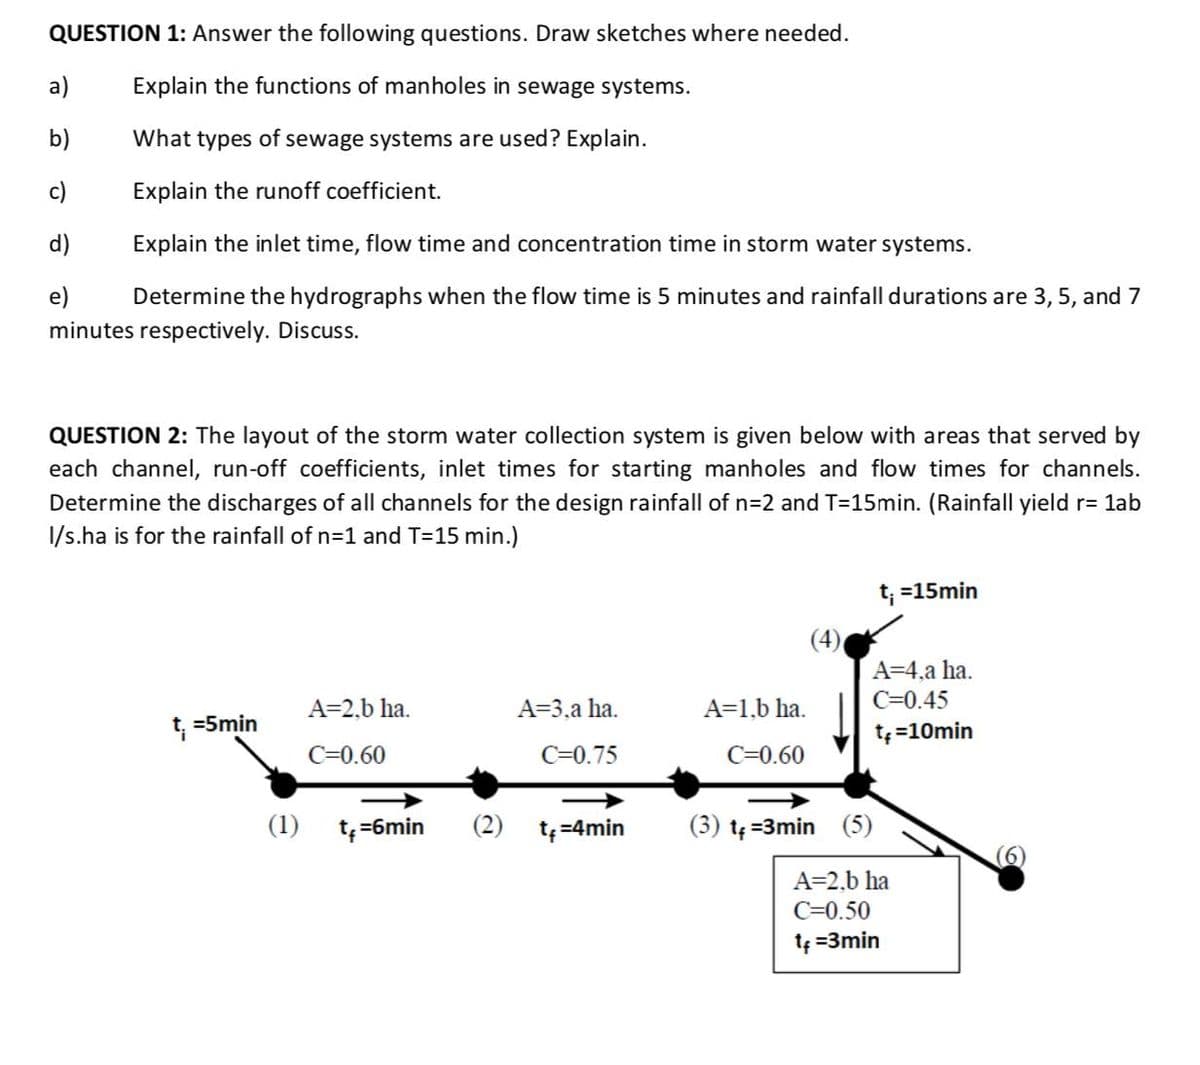 QUESTION 1: Answer the following questions. Draw sketches where needed.
a)
Explain the functions of manholes in sewage systems.
b)
What types of sewage systems are used? Explain.
c)
Explain the runoff coefficient.
d)
Explain the inlet time, flow time and concentration time in storm water systems.
e)
Determine the hydrographs when the flow time is 5 minutes and rainfall durations are 3, 5, and 7
minutes respectively. Discuss.
QUESTION 2: The layout of the storm water collection system is given below with areas that served by
each channel, run-off coefficients, inlet times for starting manholes and flow times for channels.
Determine the discharges of all channels for the design rainfall of n=2 and T=15min. (Rainfall yield r= lab
I/s.ha is for the rainfall of n=1 and T=15 min.)
t; =15min
(4)
A=4,a ha.
A=2,b ha.
A=3,a ha.
A=1,b ha.
C=0.45
t; =5min
t=10min
C=0.60
C=0.75
C=0.60
(1) t;=6min
(2)
t=4min
(3) tę =3min (5)
A=2,b ha
C=0.50
te =3min
